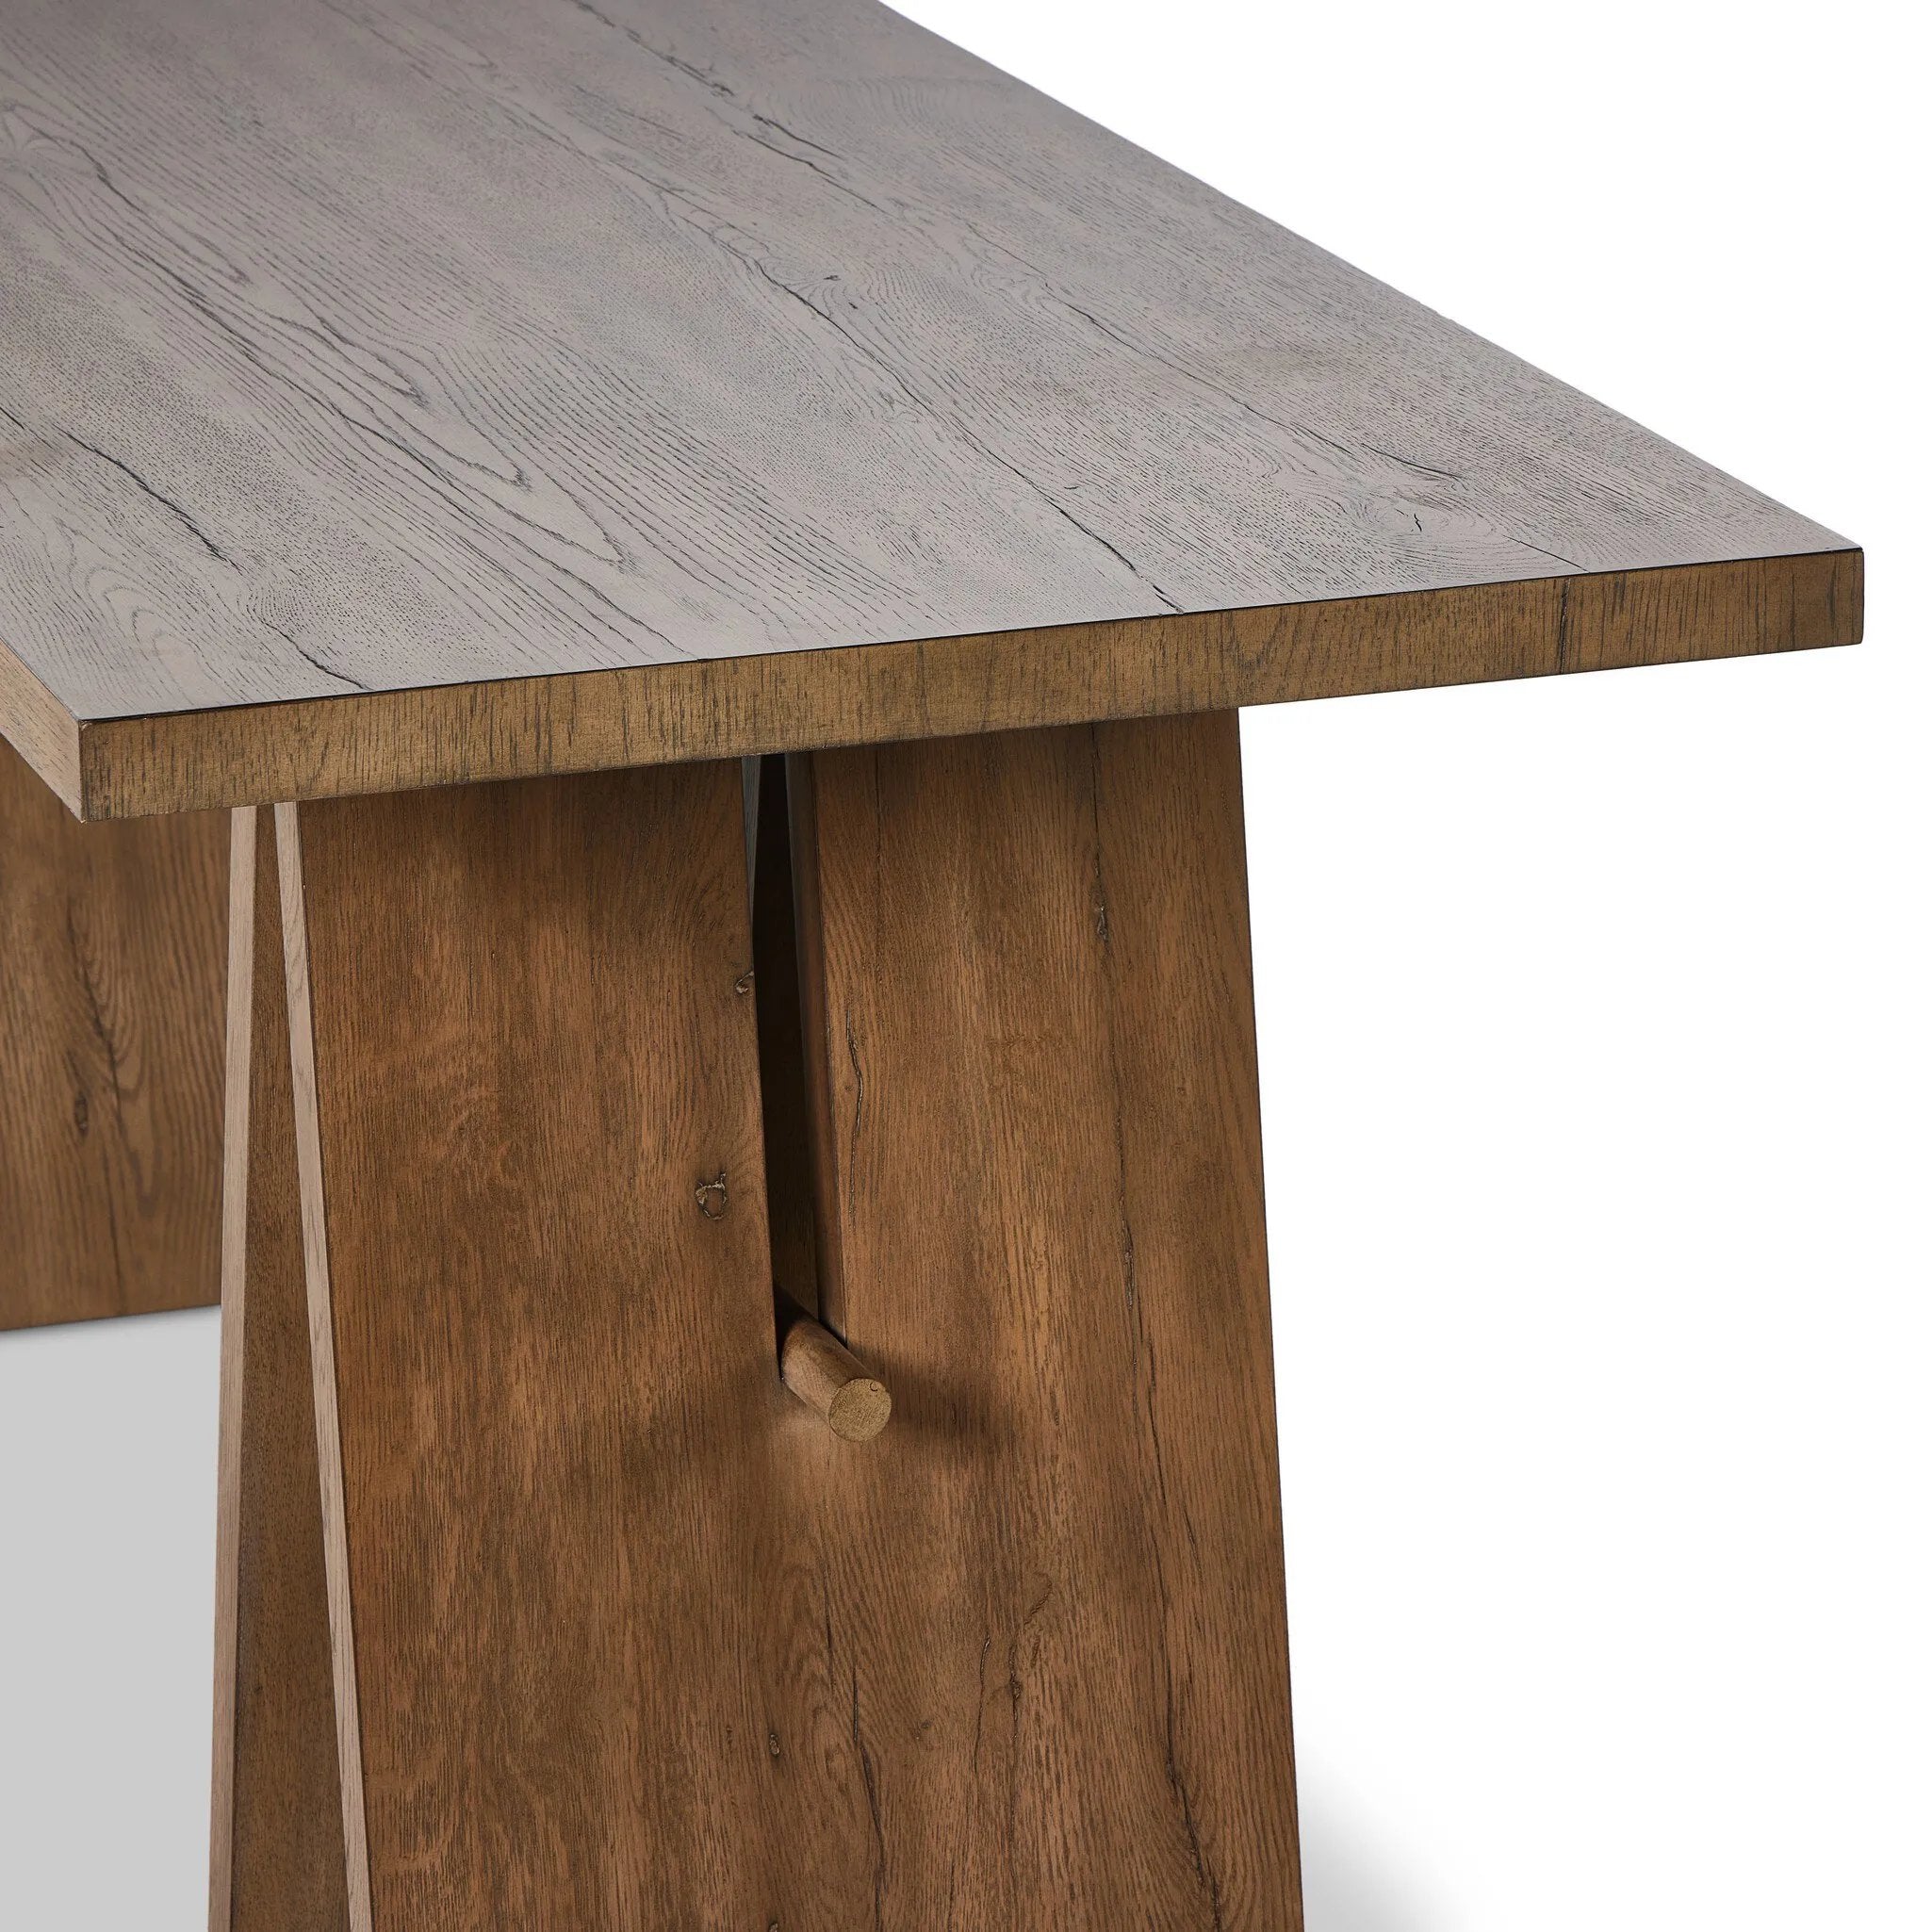 A minimalist frame on this large-scale desk lets the natural character of cracked oak take center stage. Designed with A-frame legs with exposed wood dowel joinery.Collection: Haide Amethyst Home provides interior design, new home construction design consulting, vintage area rugs, and lighting in the San Diego metro area.